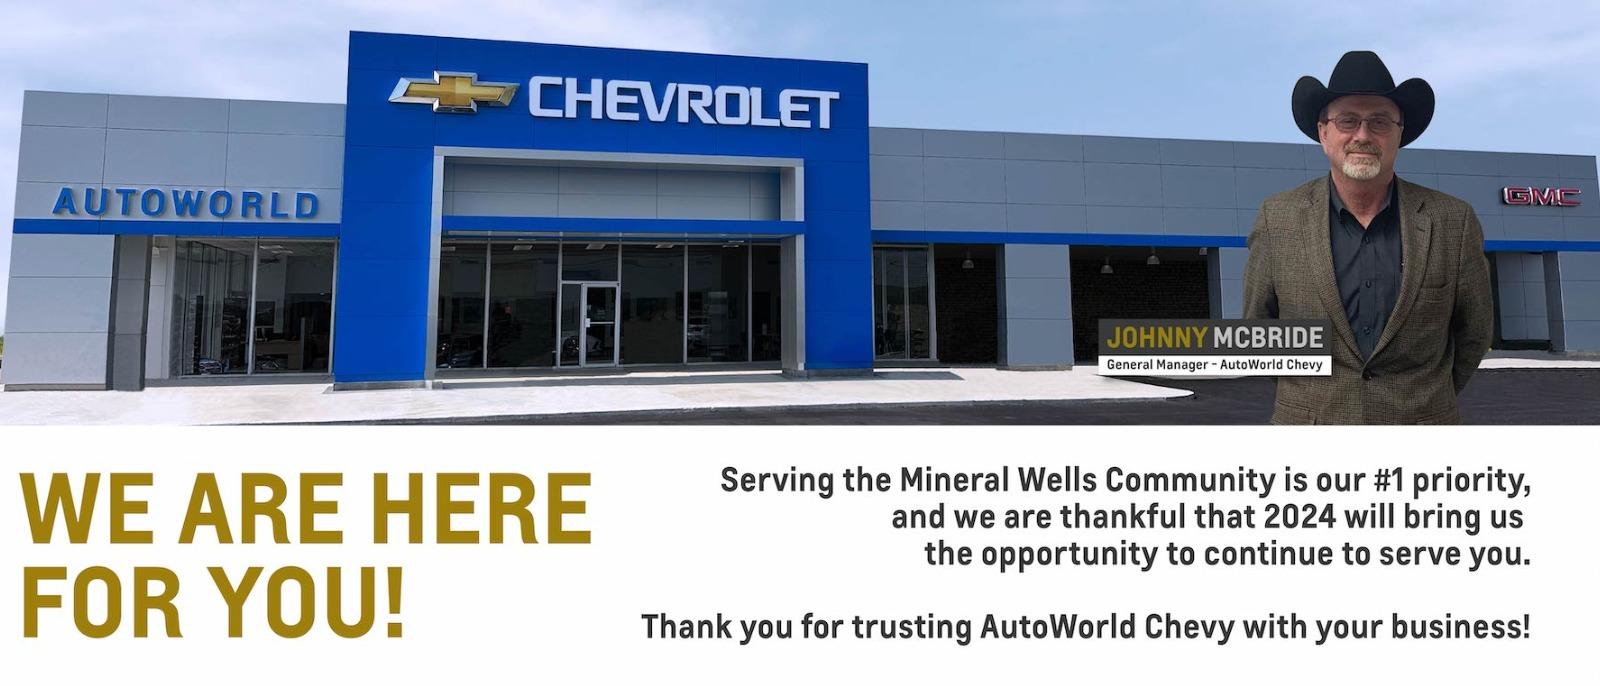 Our General Manager of AutoWorld Chevrolet has a Special New Year's message